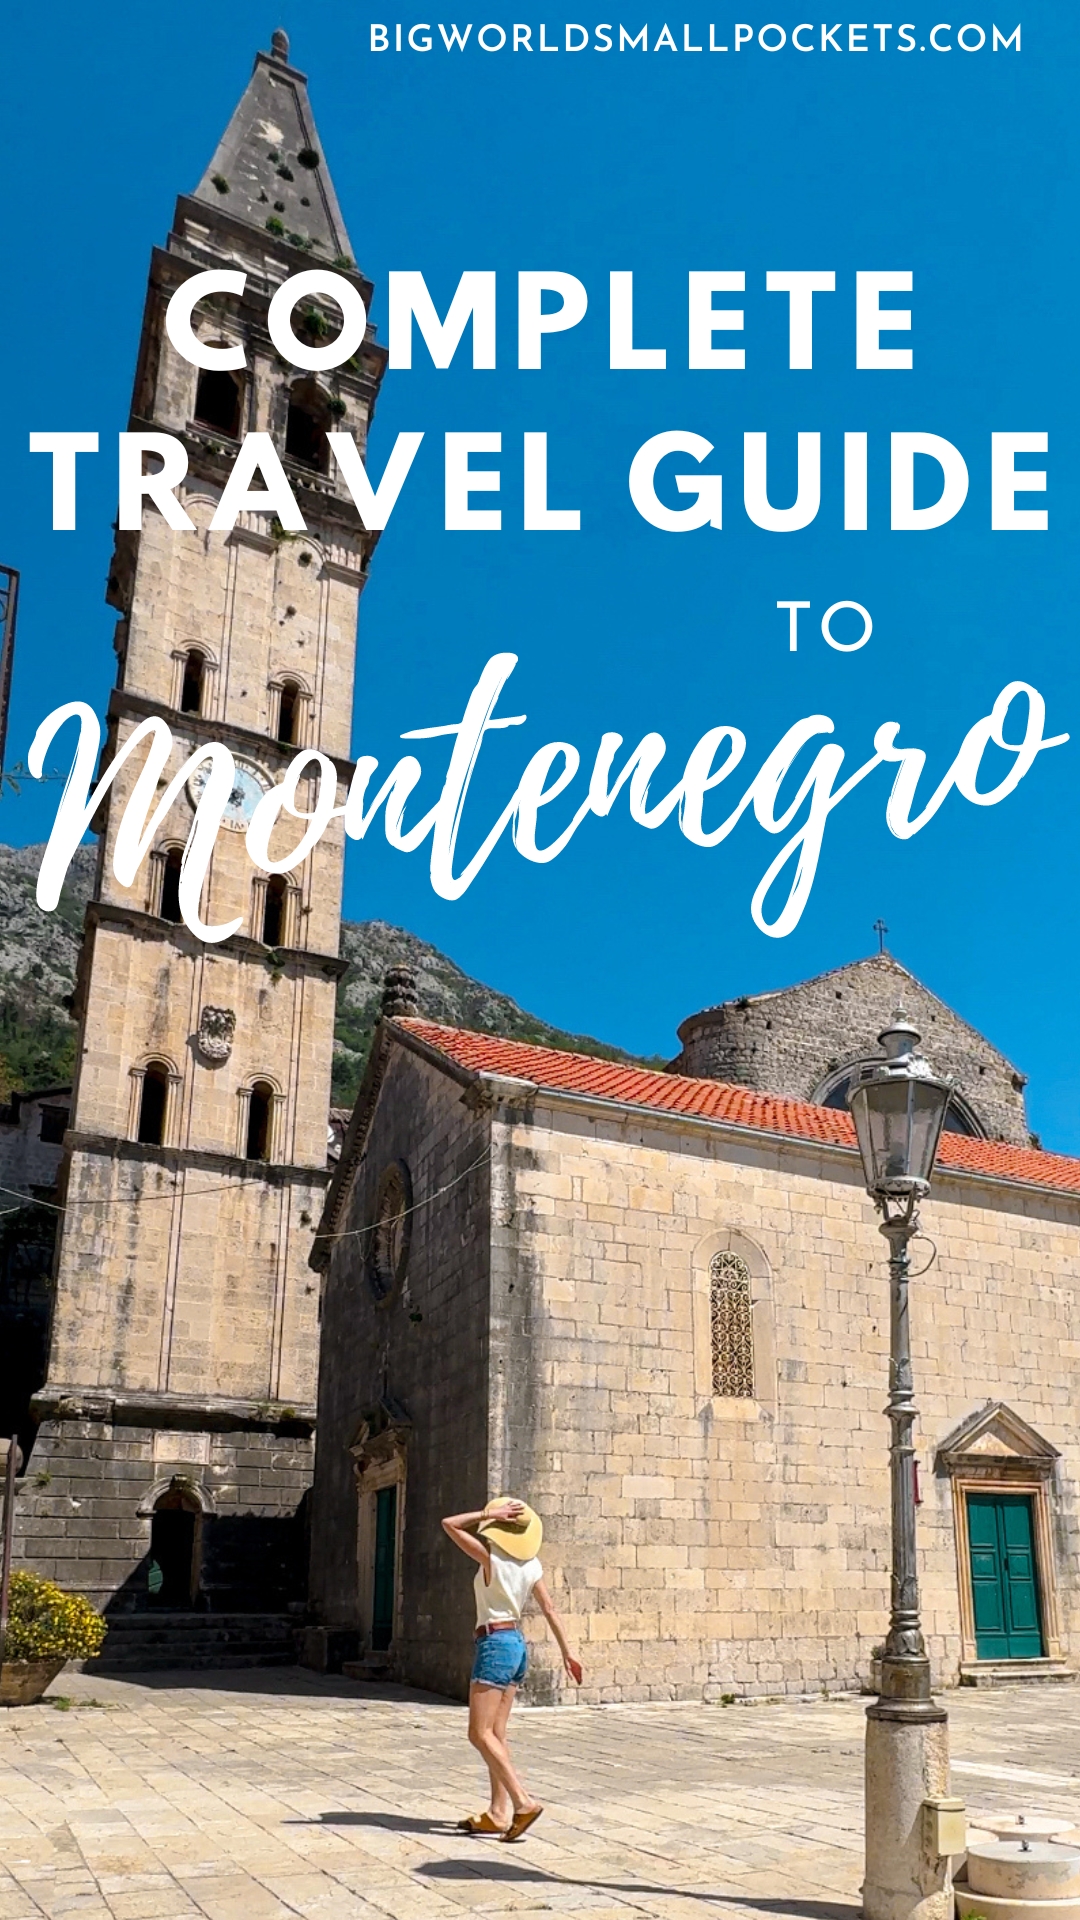 Complete Travel Guide to Montenegro